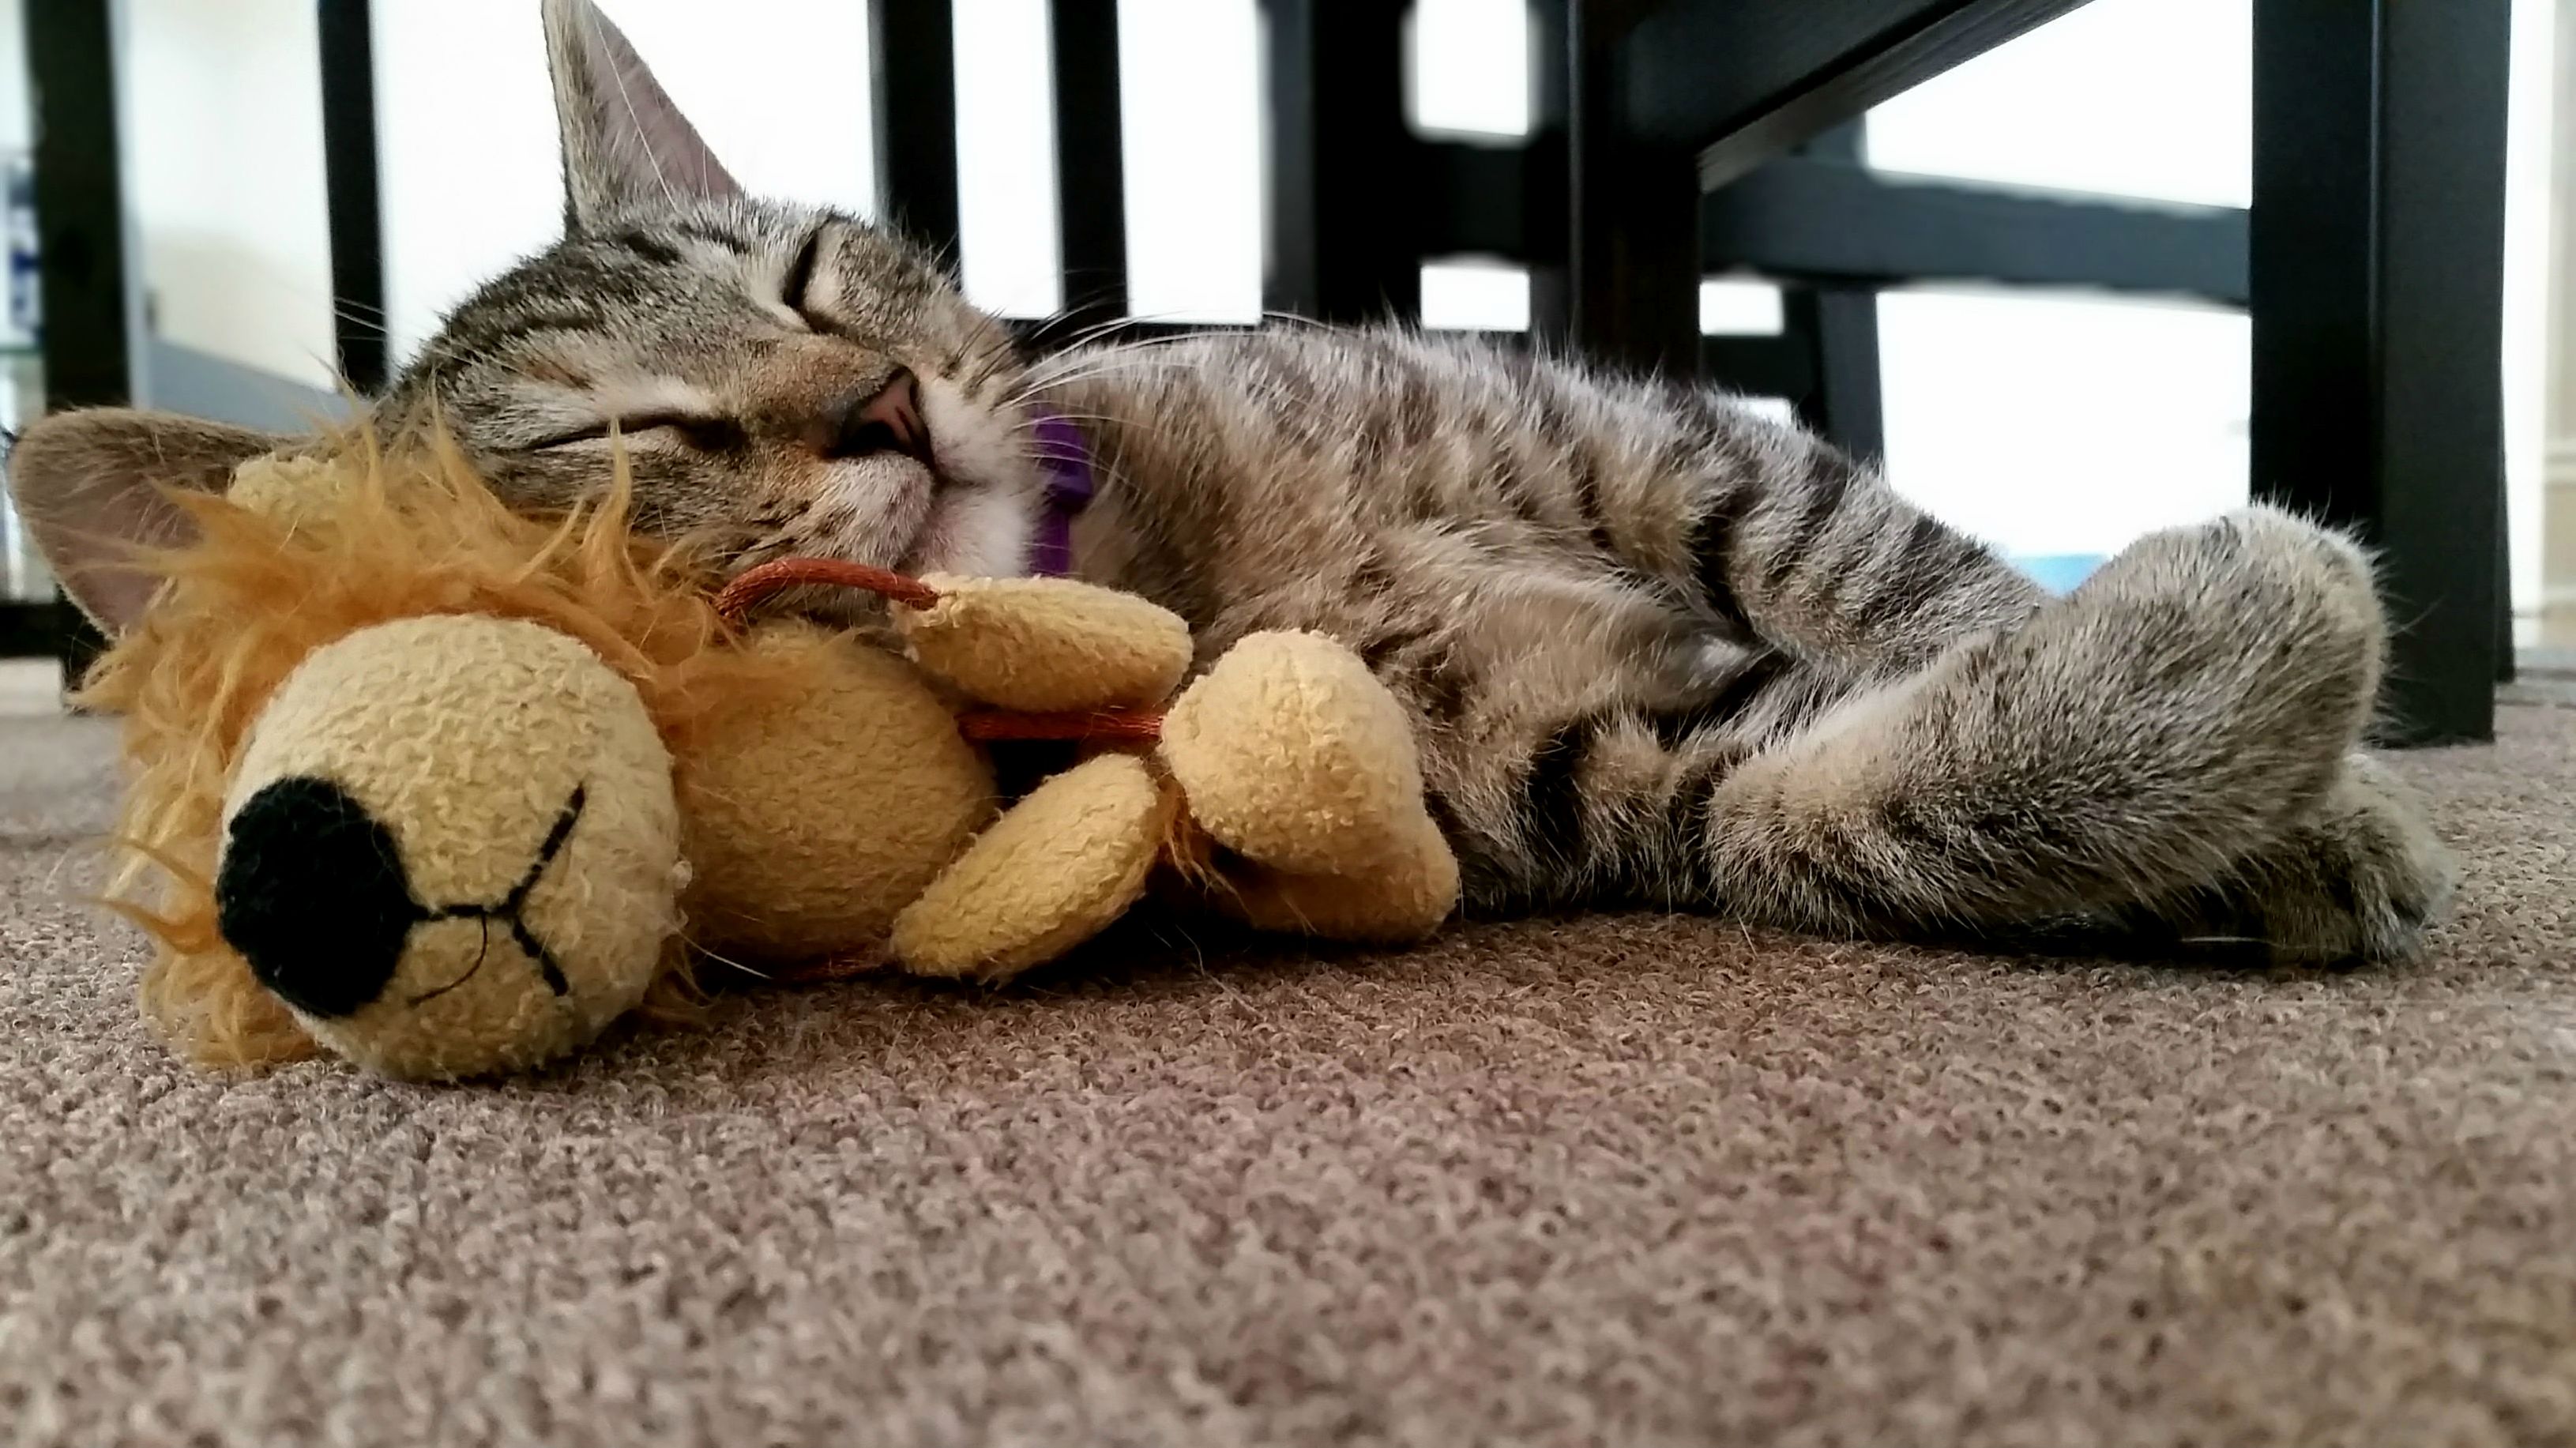 Zoe and her lion